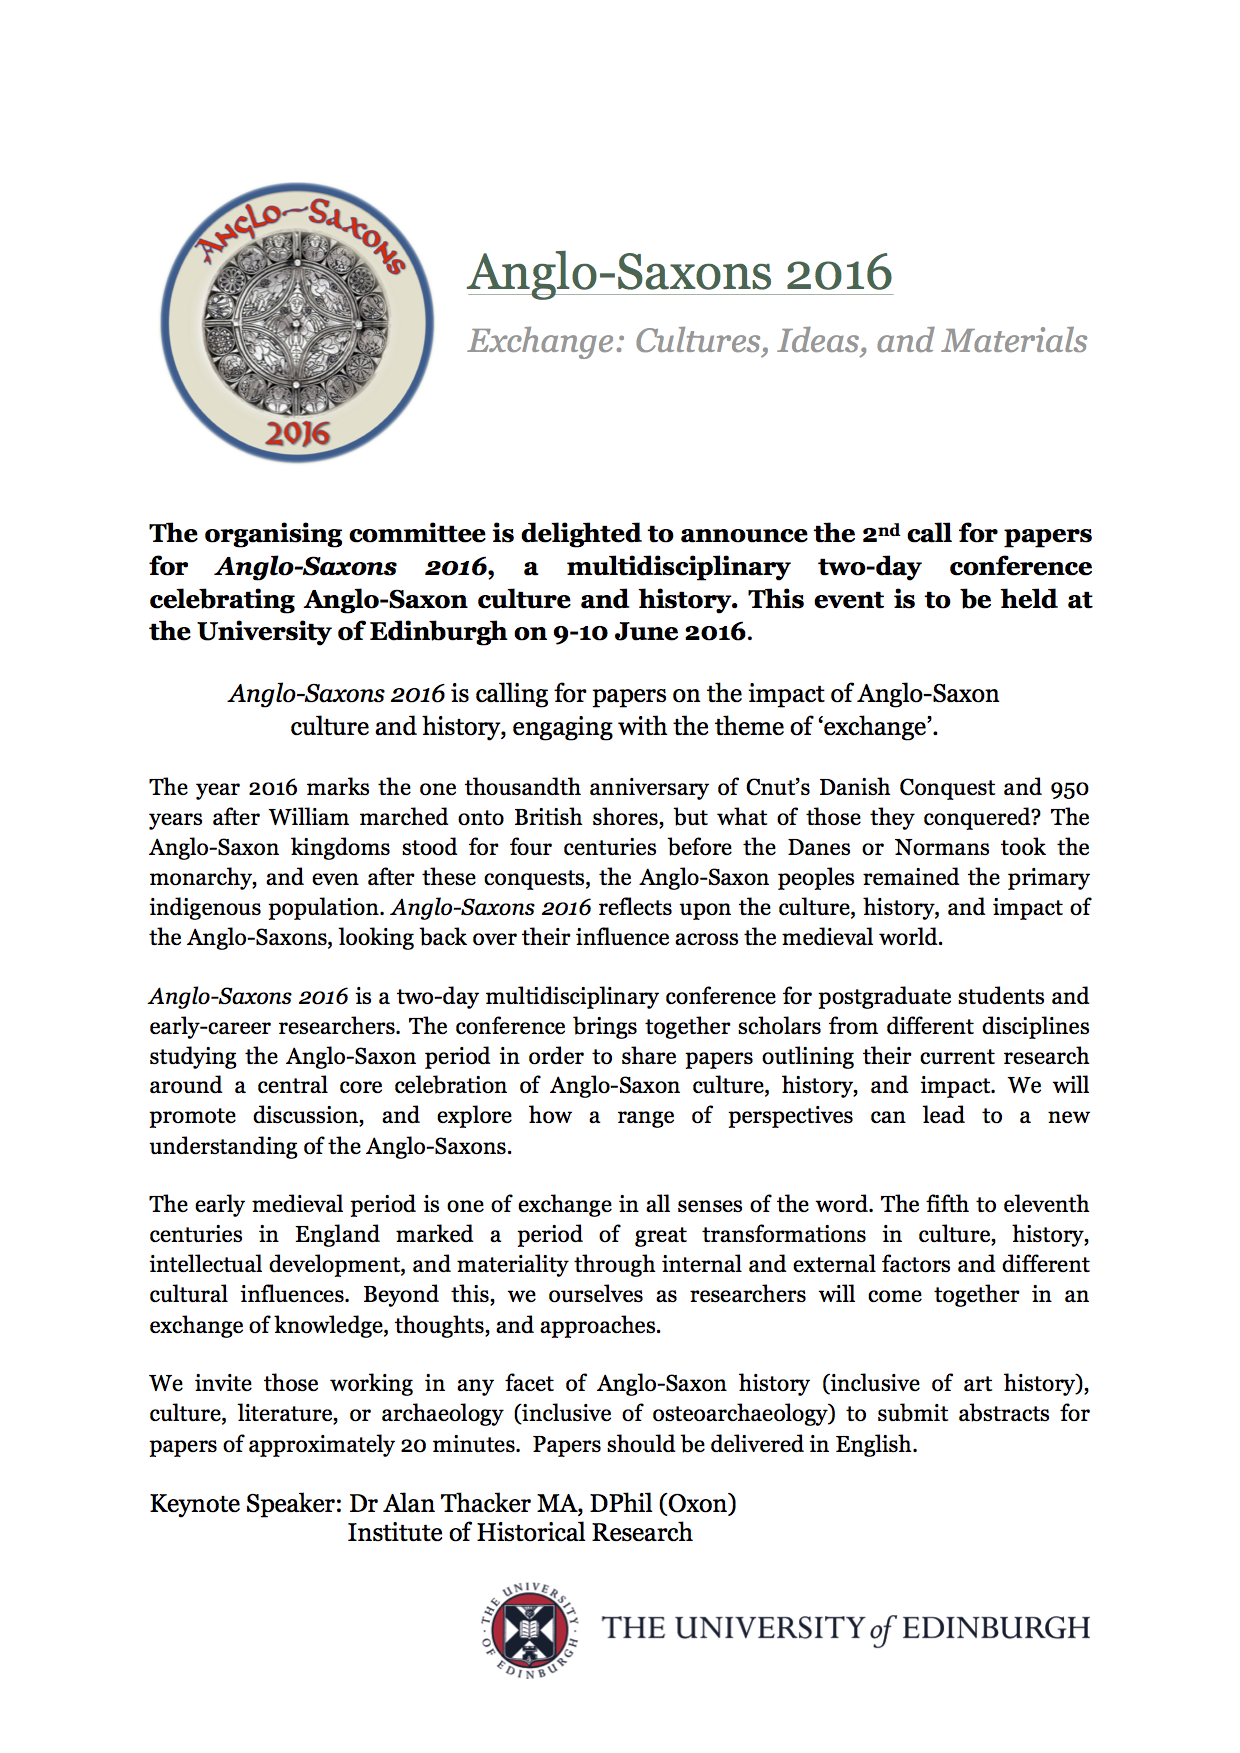 Anglo-Saxons 2016 2nd CfP